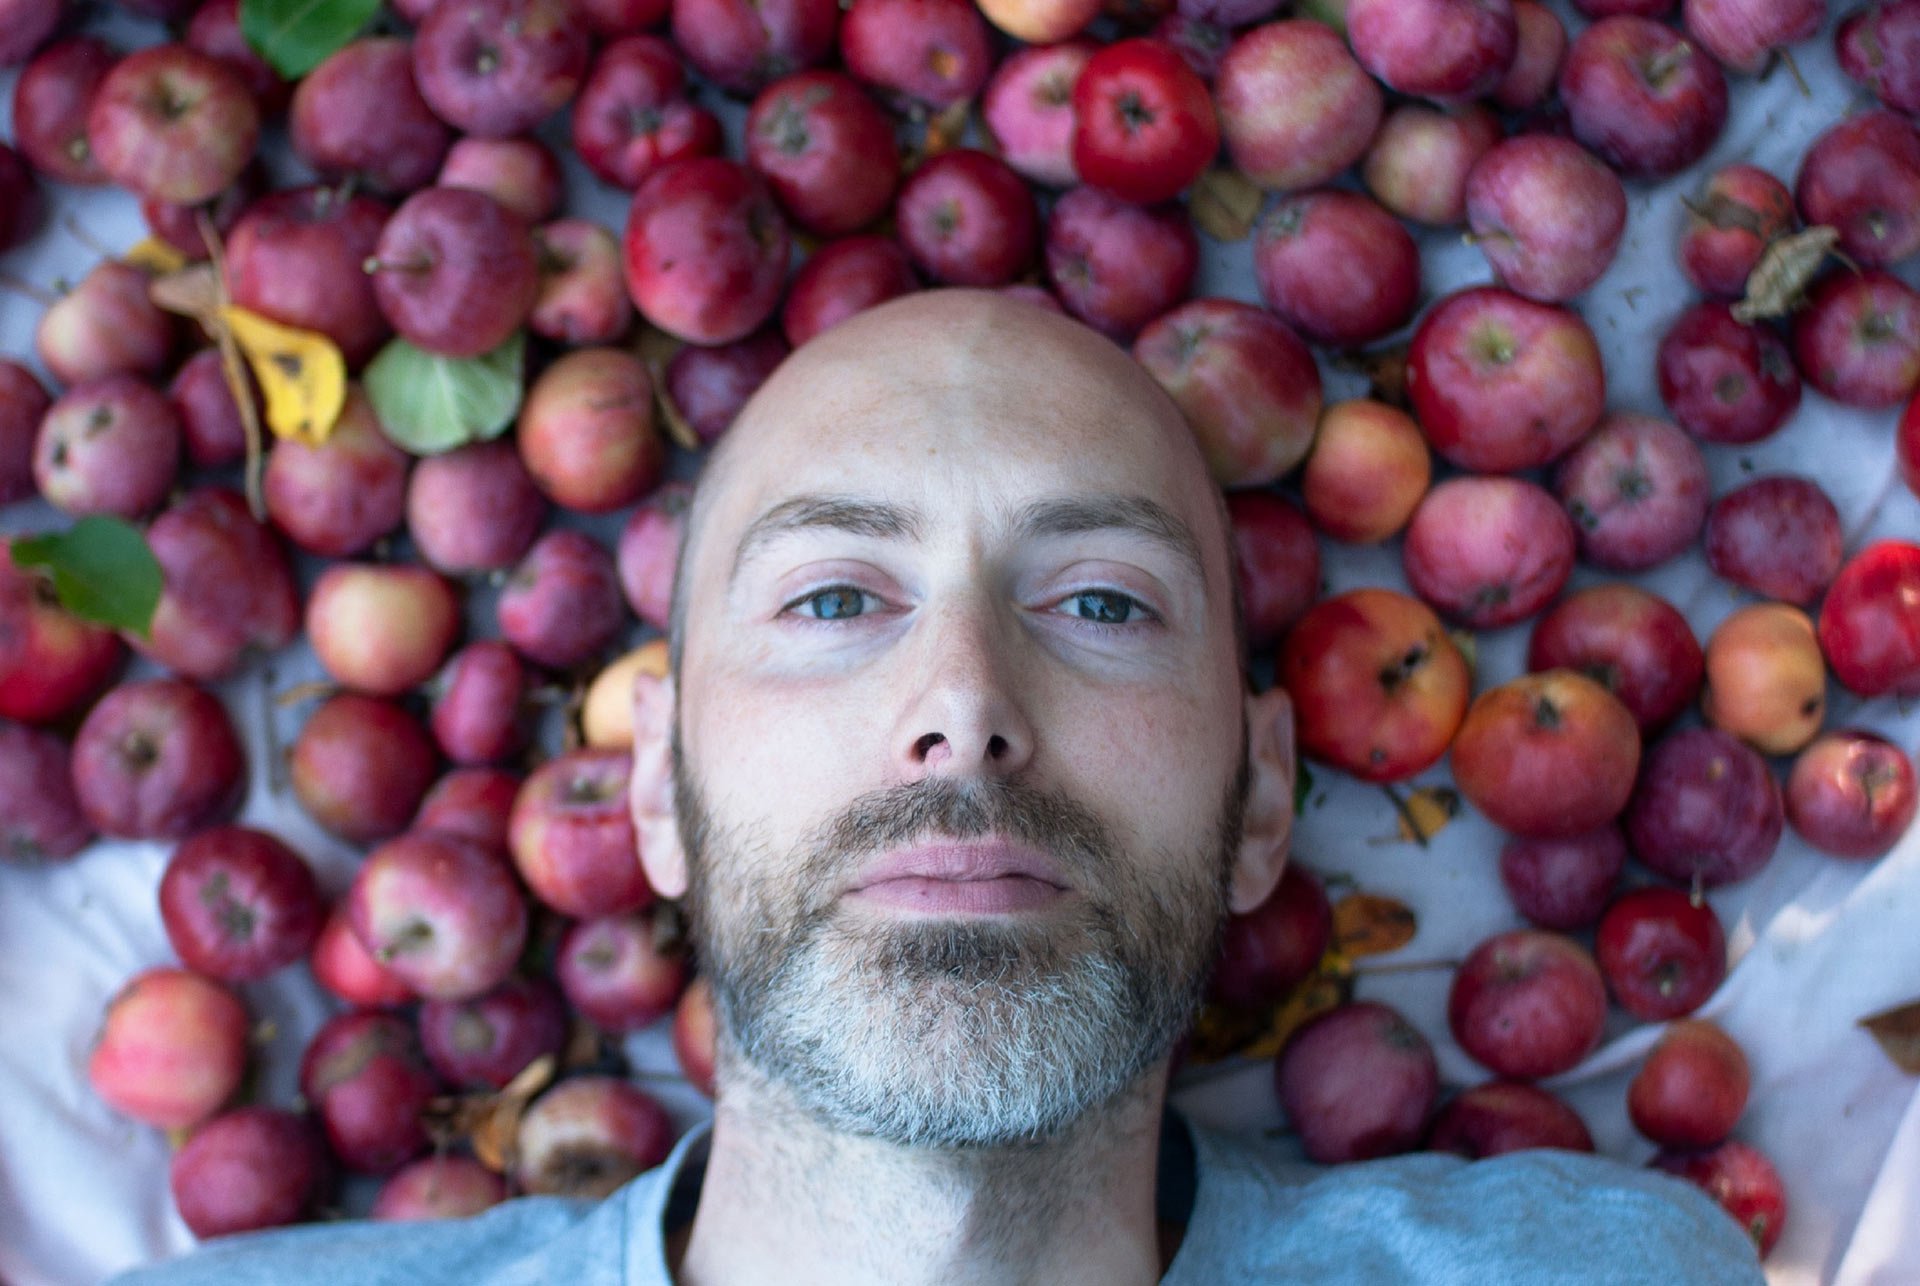 a-portrait-of-a-man-looking-directly-at-you-while-lying-down-on-a-lawn-covered-with-apples